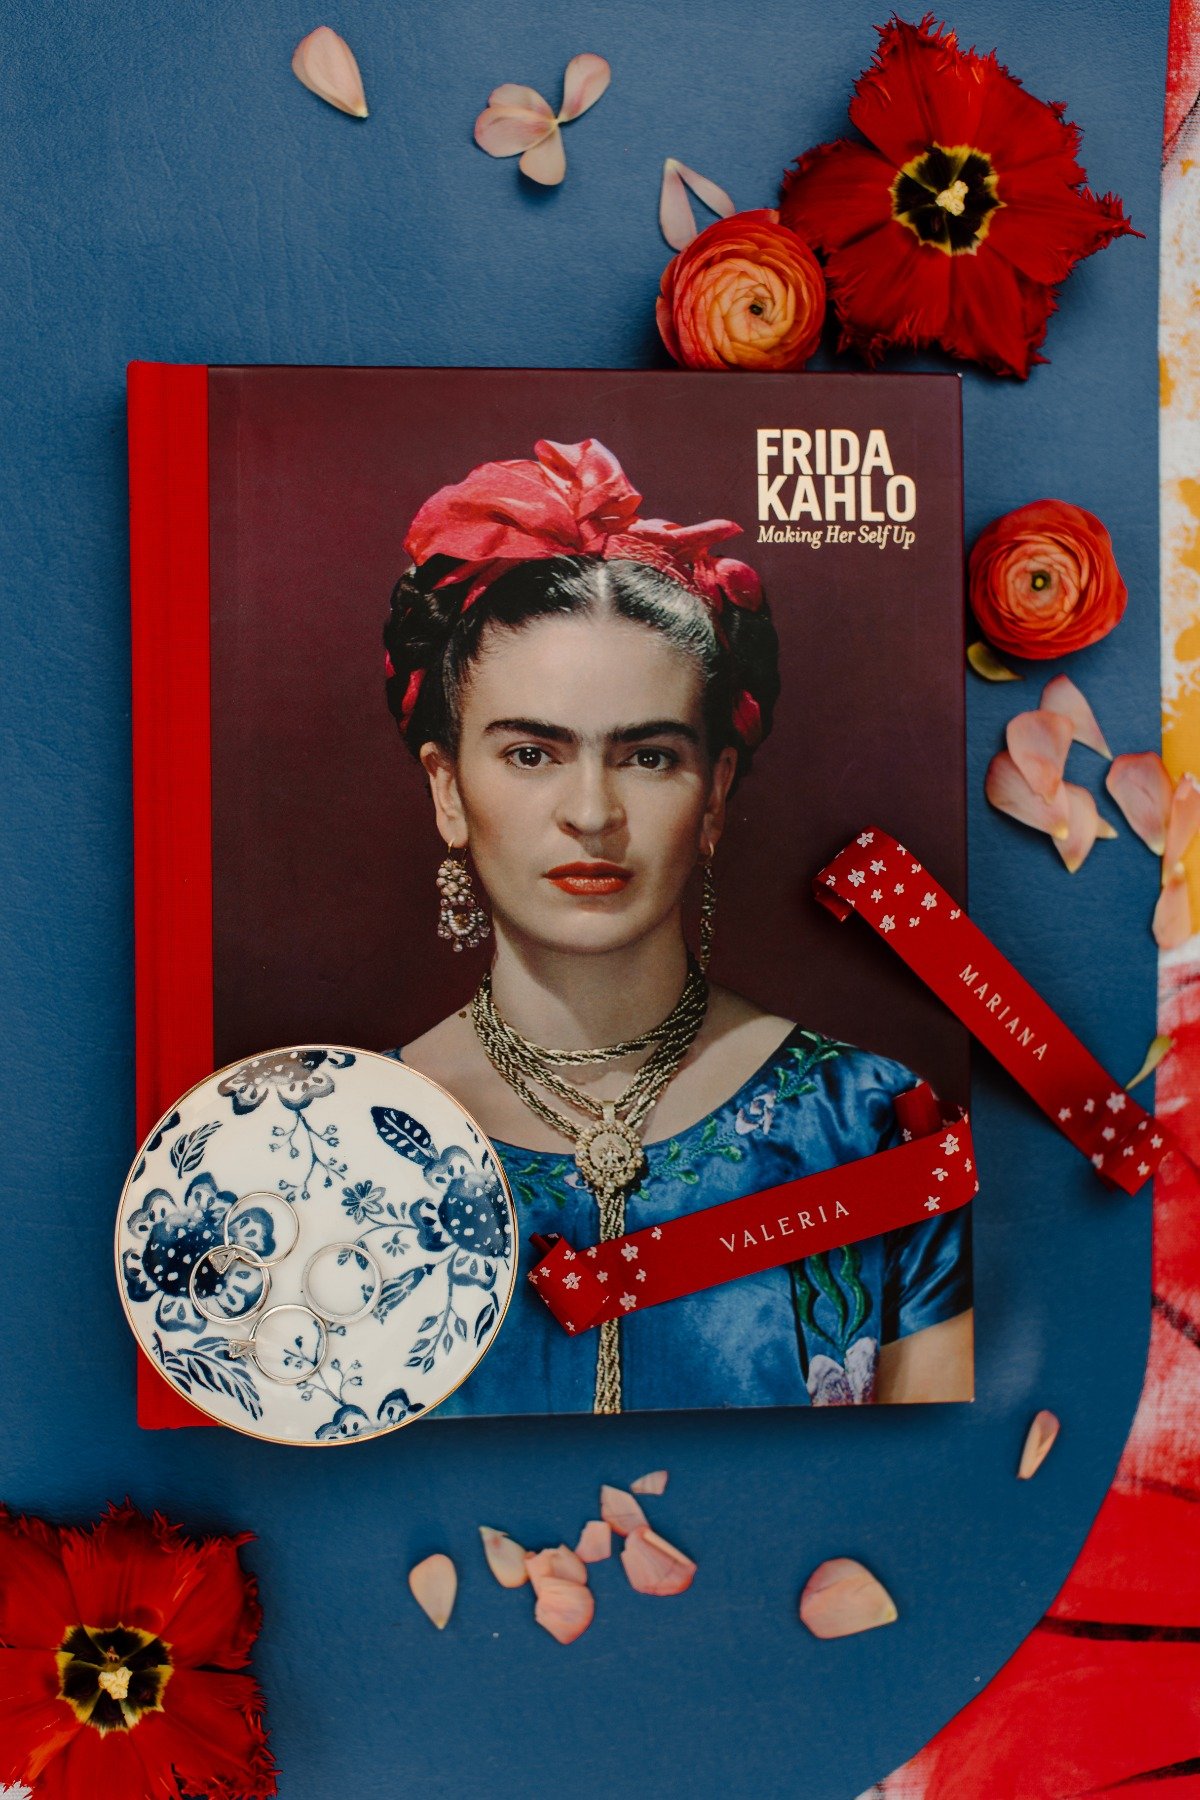 Art Comes to Life at this Bright and Bold Inspo Shoot Honoring The Strength of Frida Kahlo